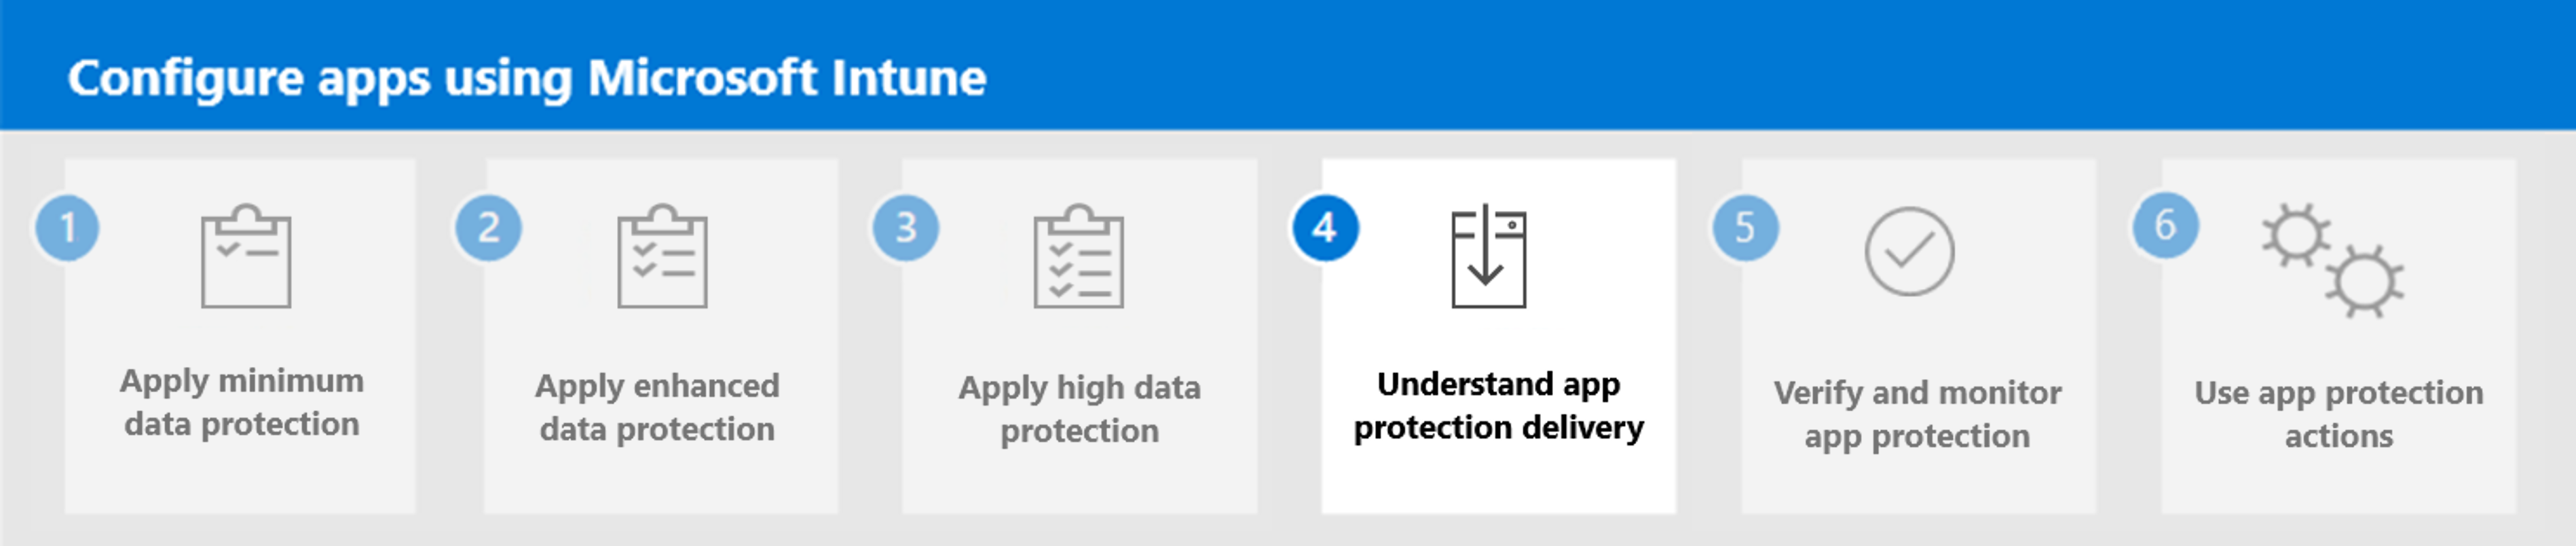 Step 4. Understand app protection delivery.